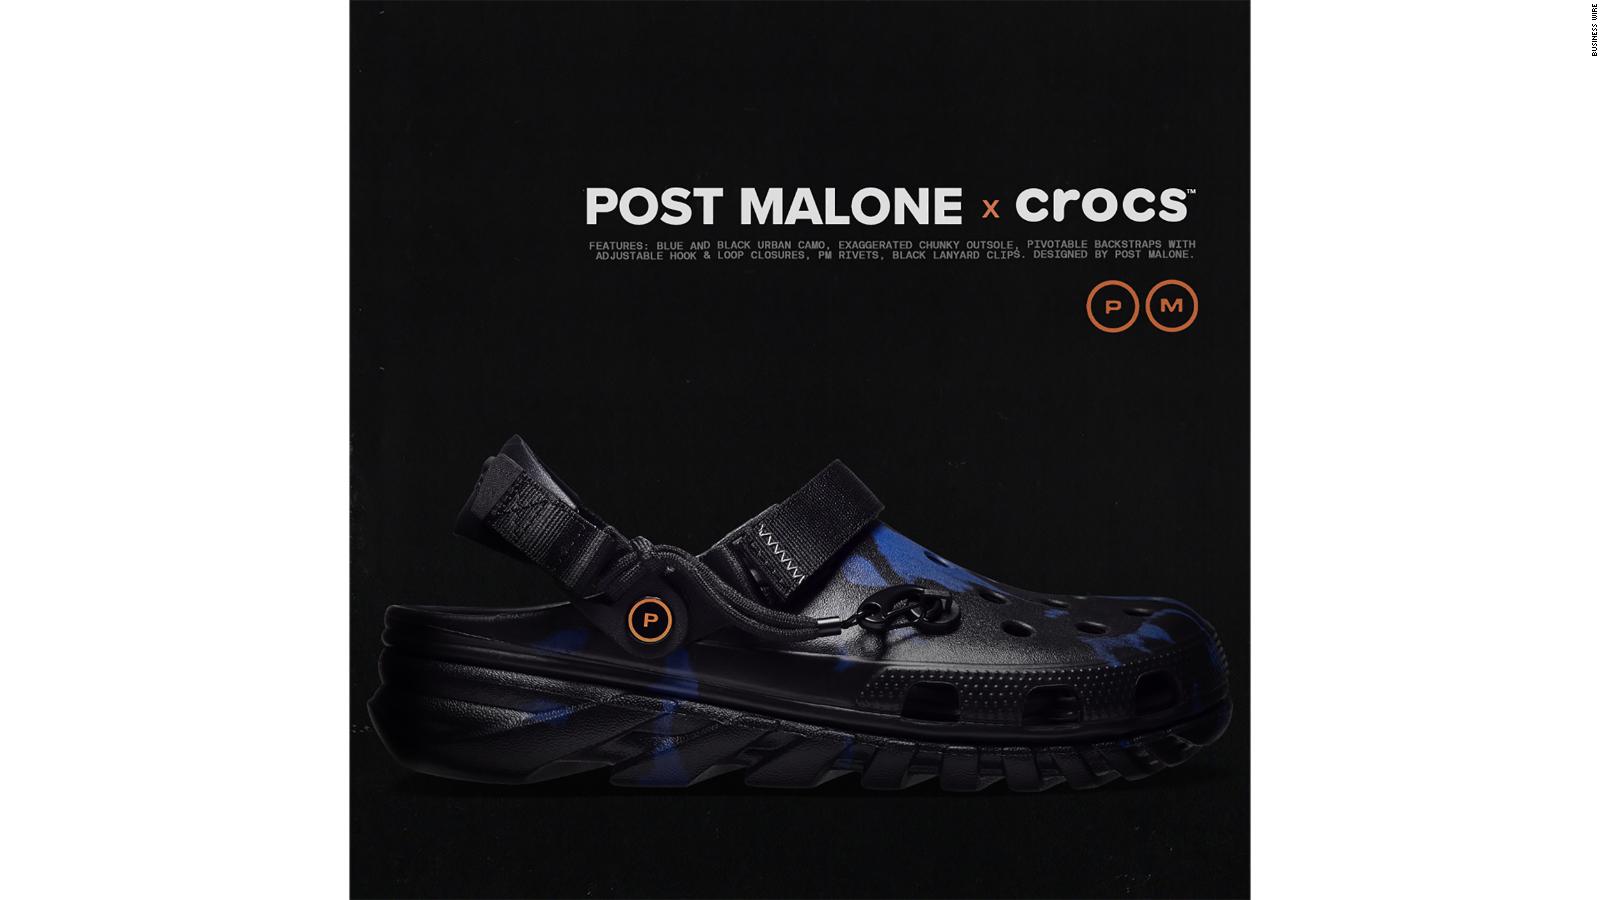 Post Malone's Crocs sold out in under 